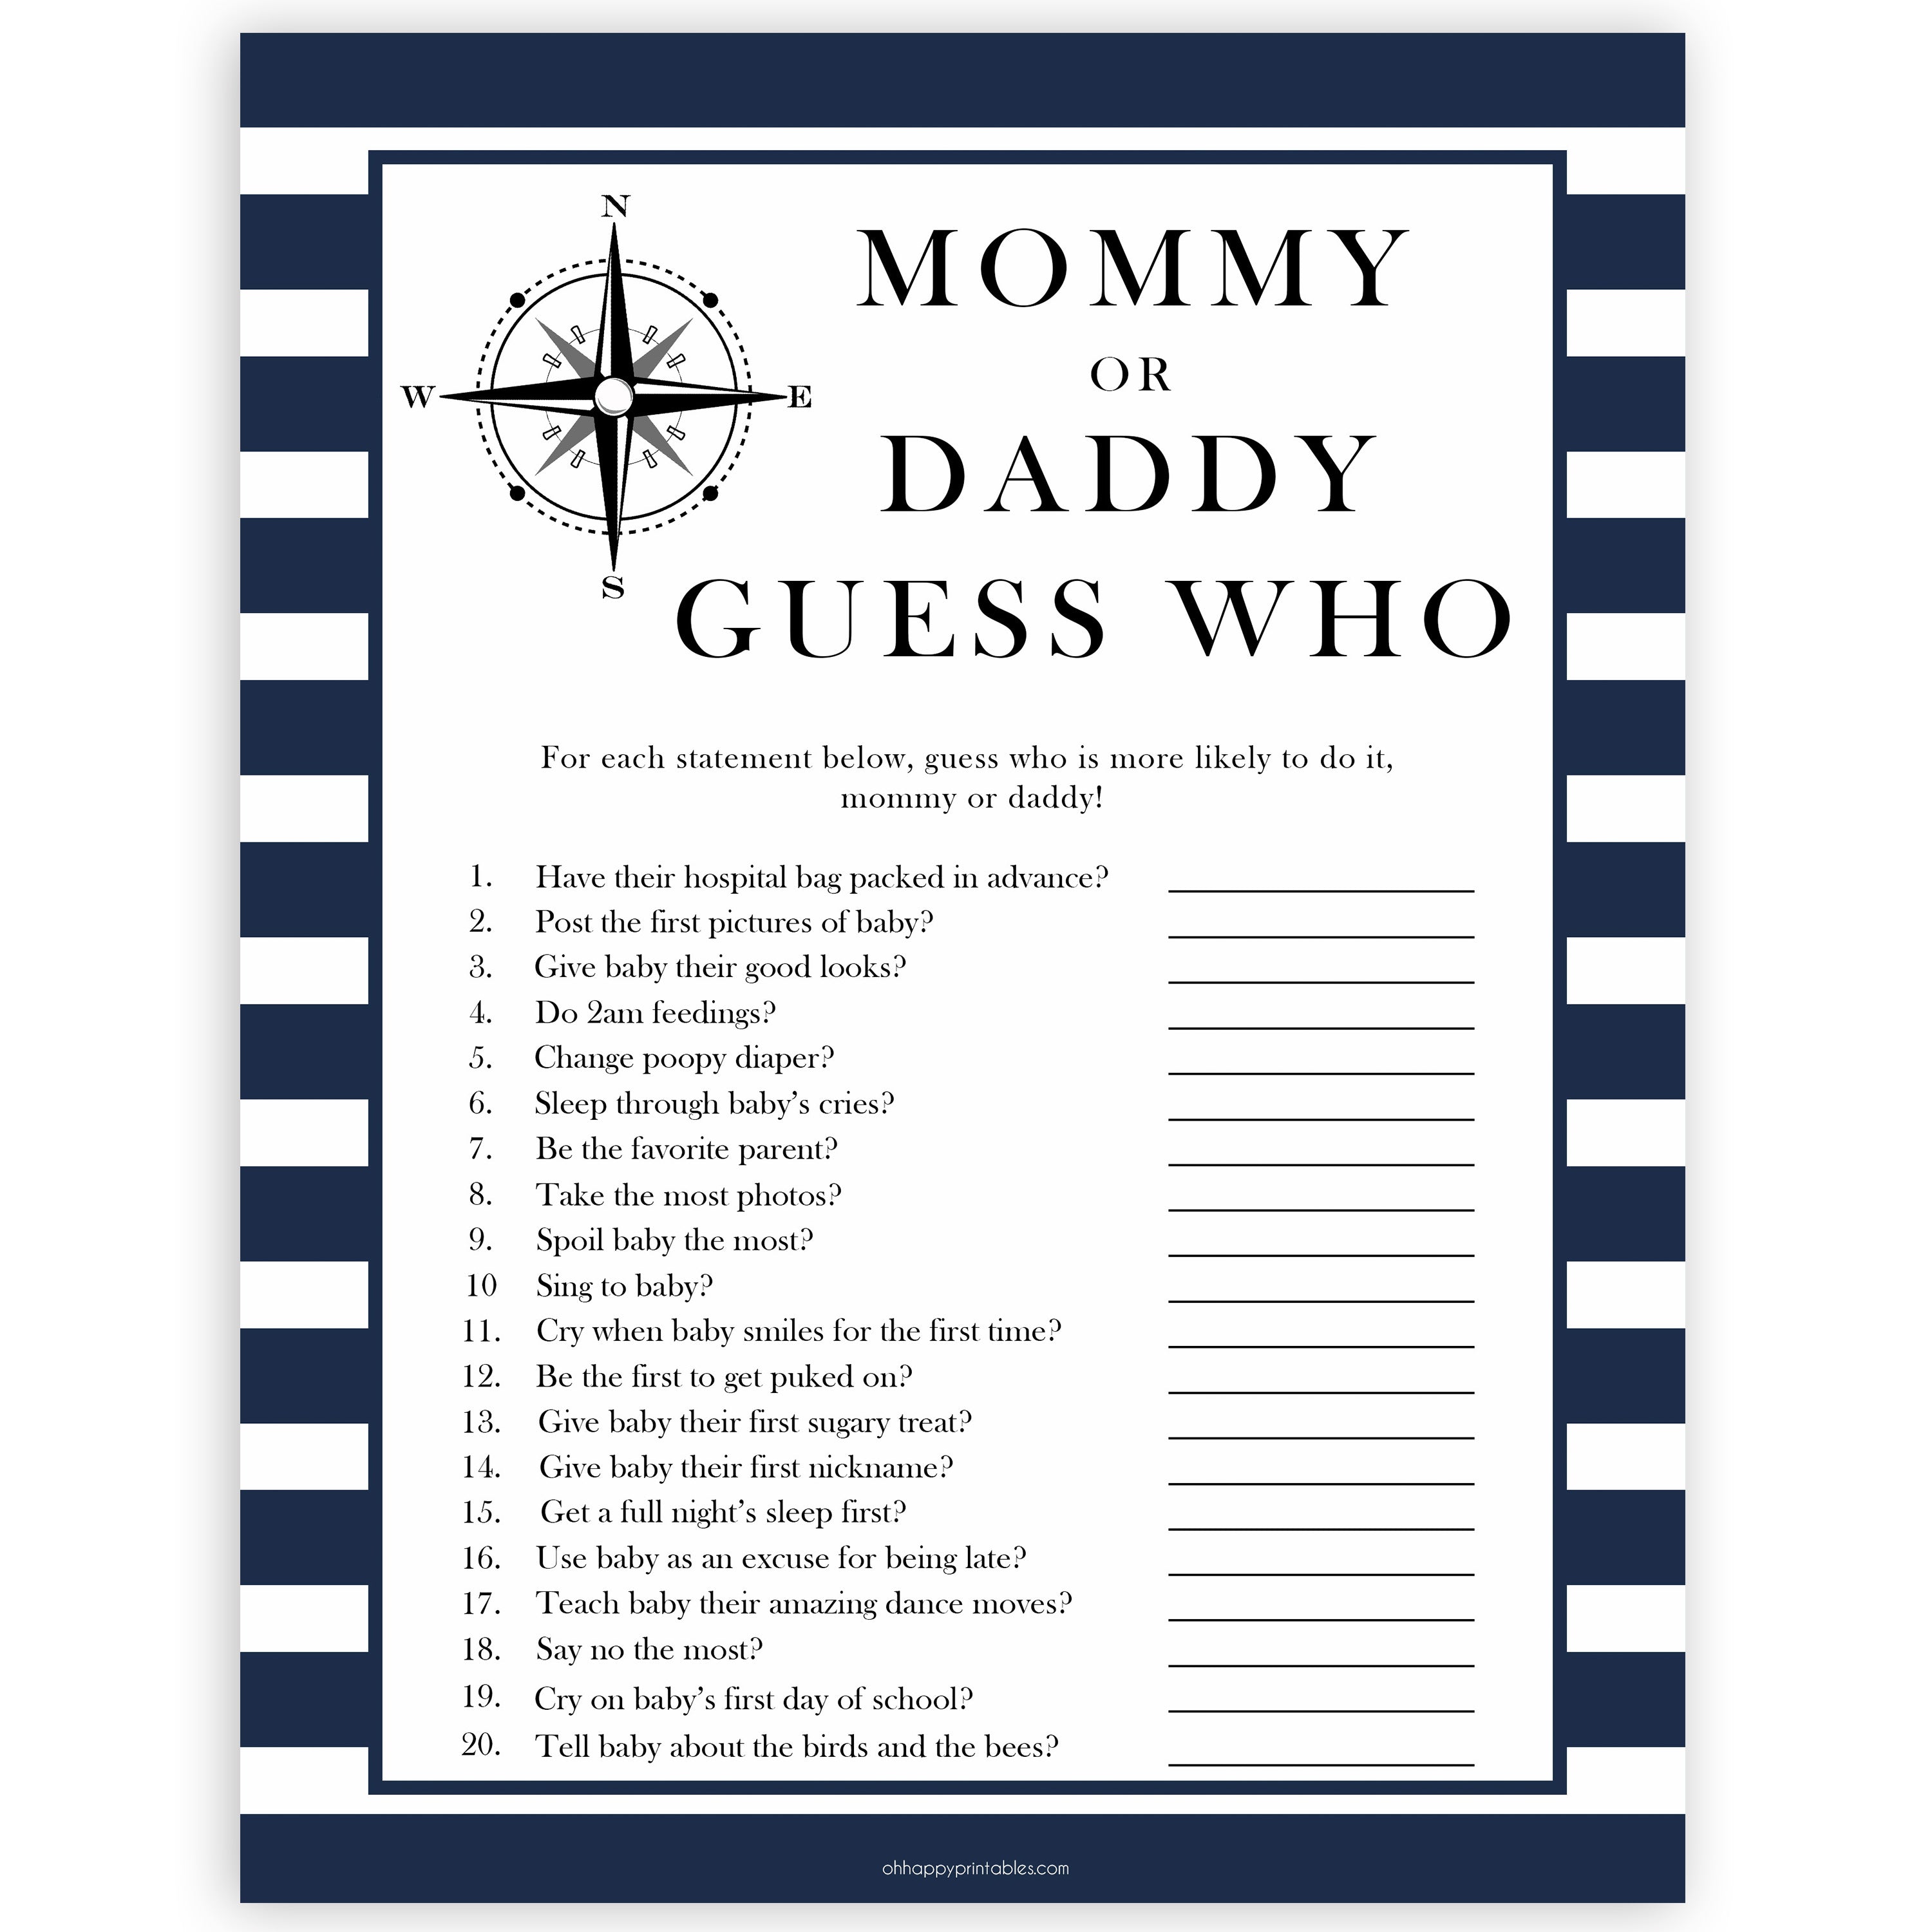 Nautical baby shower games, guess who mommy or daddy baby shower games, printable baby shower games, baby shower games, fun baby games, ahoy its a boy, popular baby shower games, sailor baby games, boat baby games